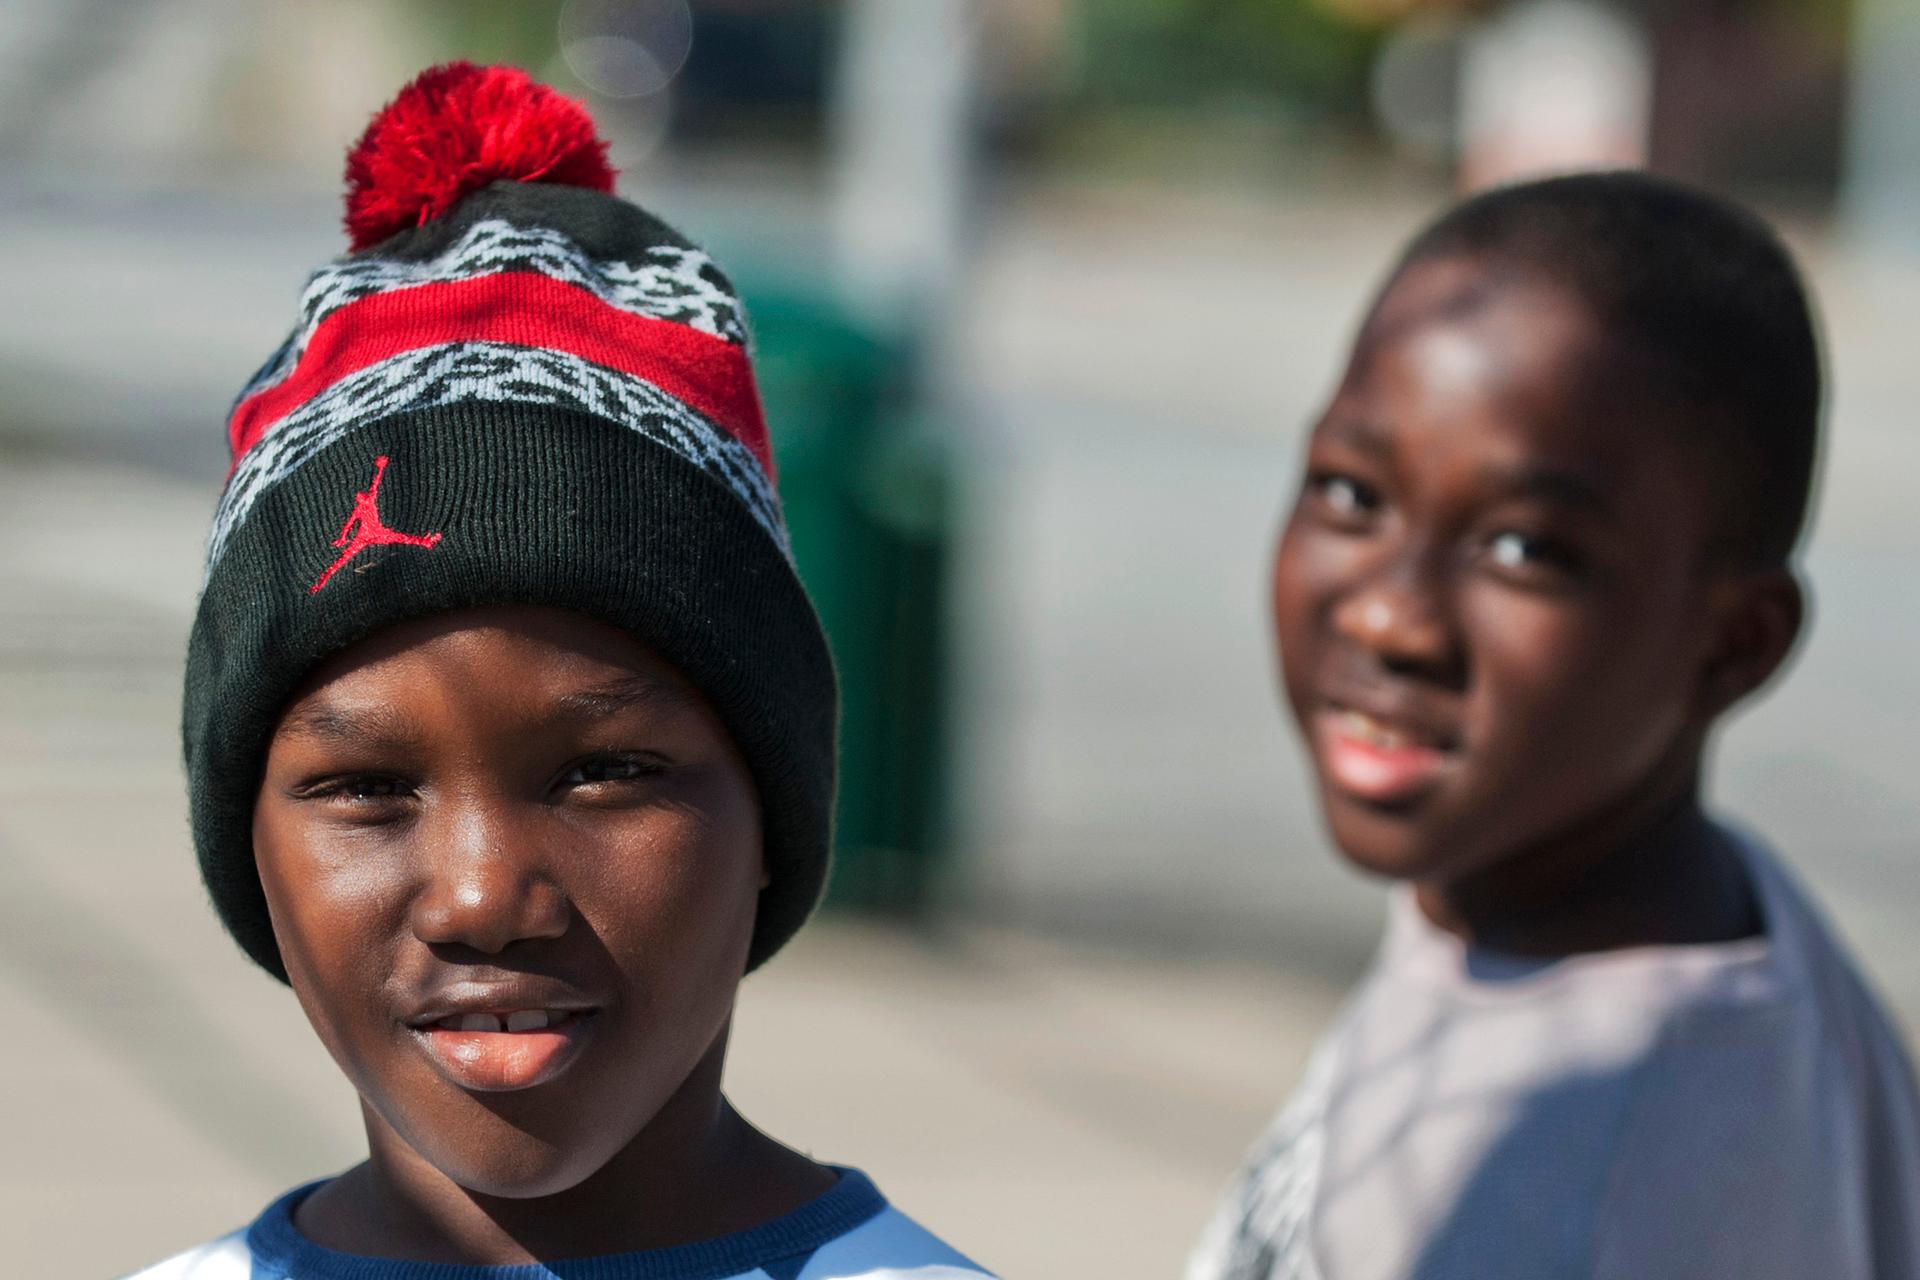 Young residents pose for a photograph on a street in the Clifton neighborhood of Staten Island in New York on October 25, 2014. The area is home to a community known as "Little Liberia" — it has the largest concentration of Liberians outside of Africa.